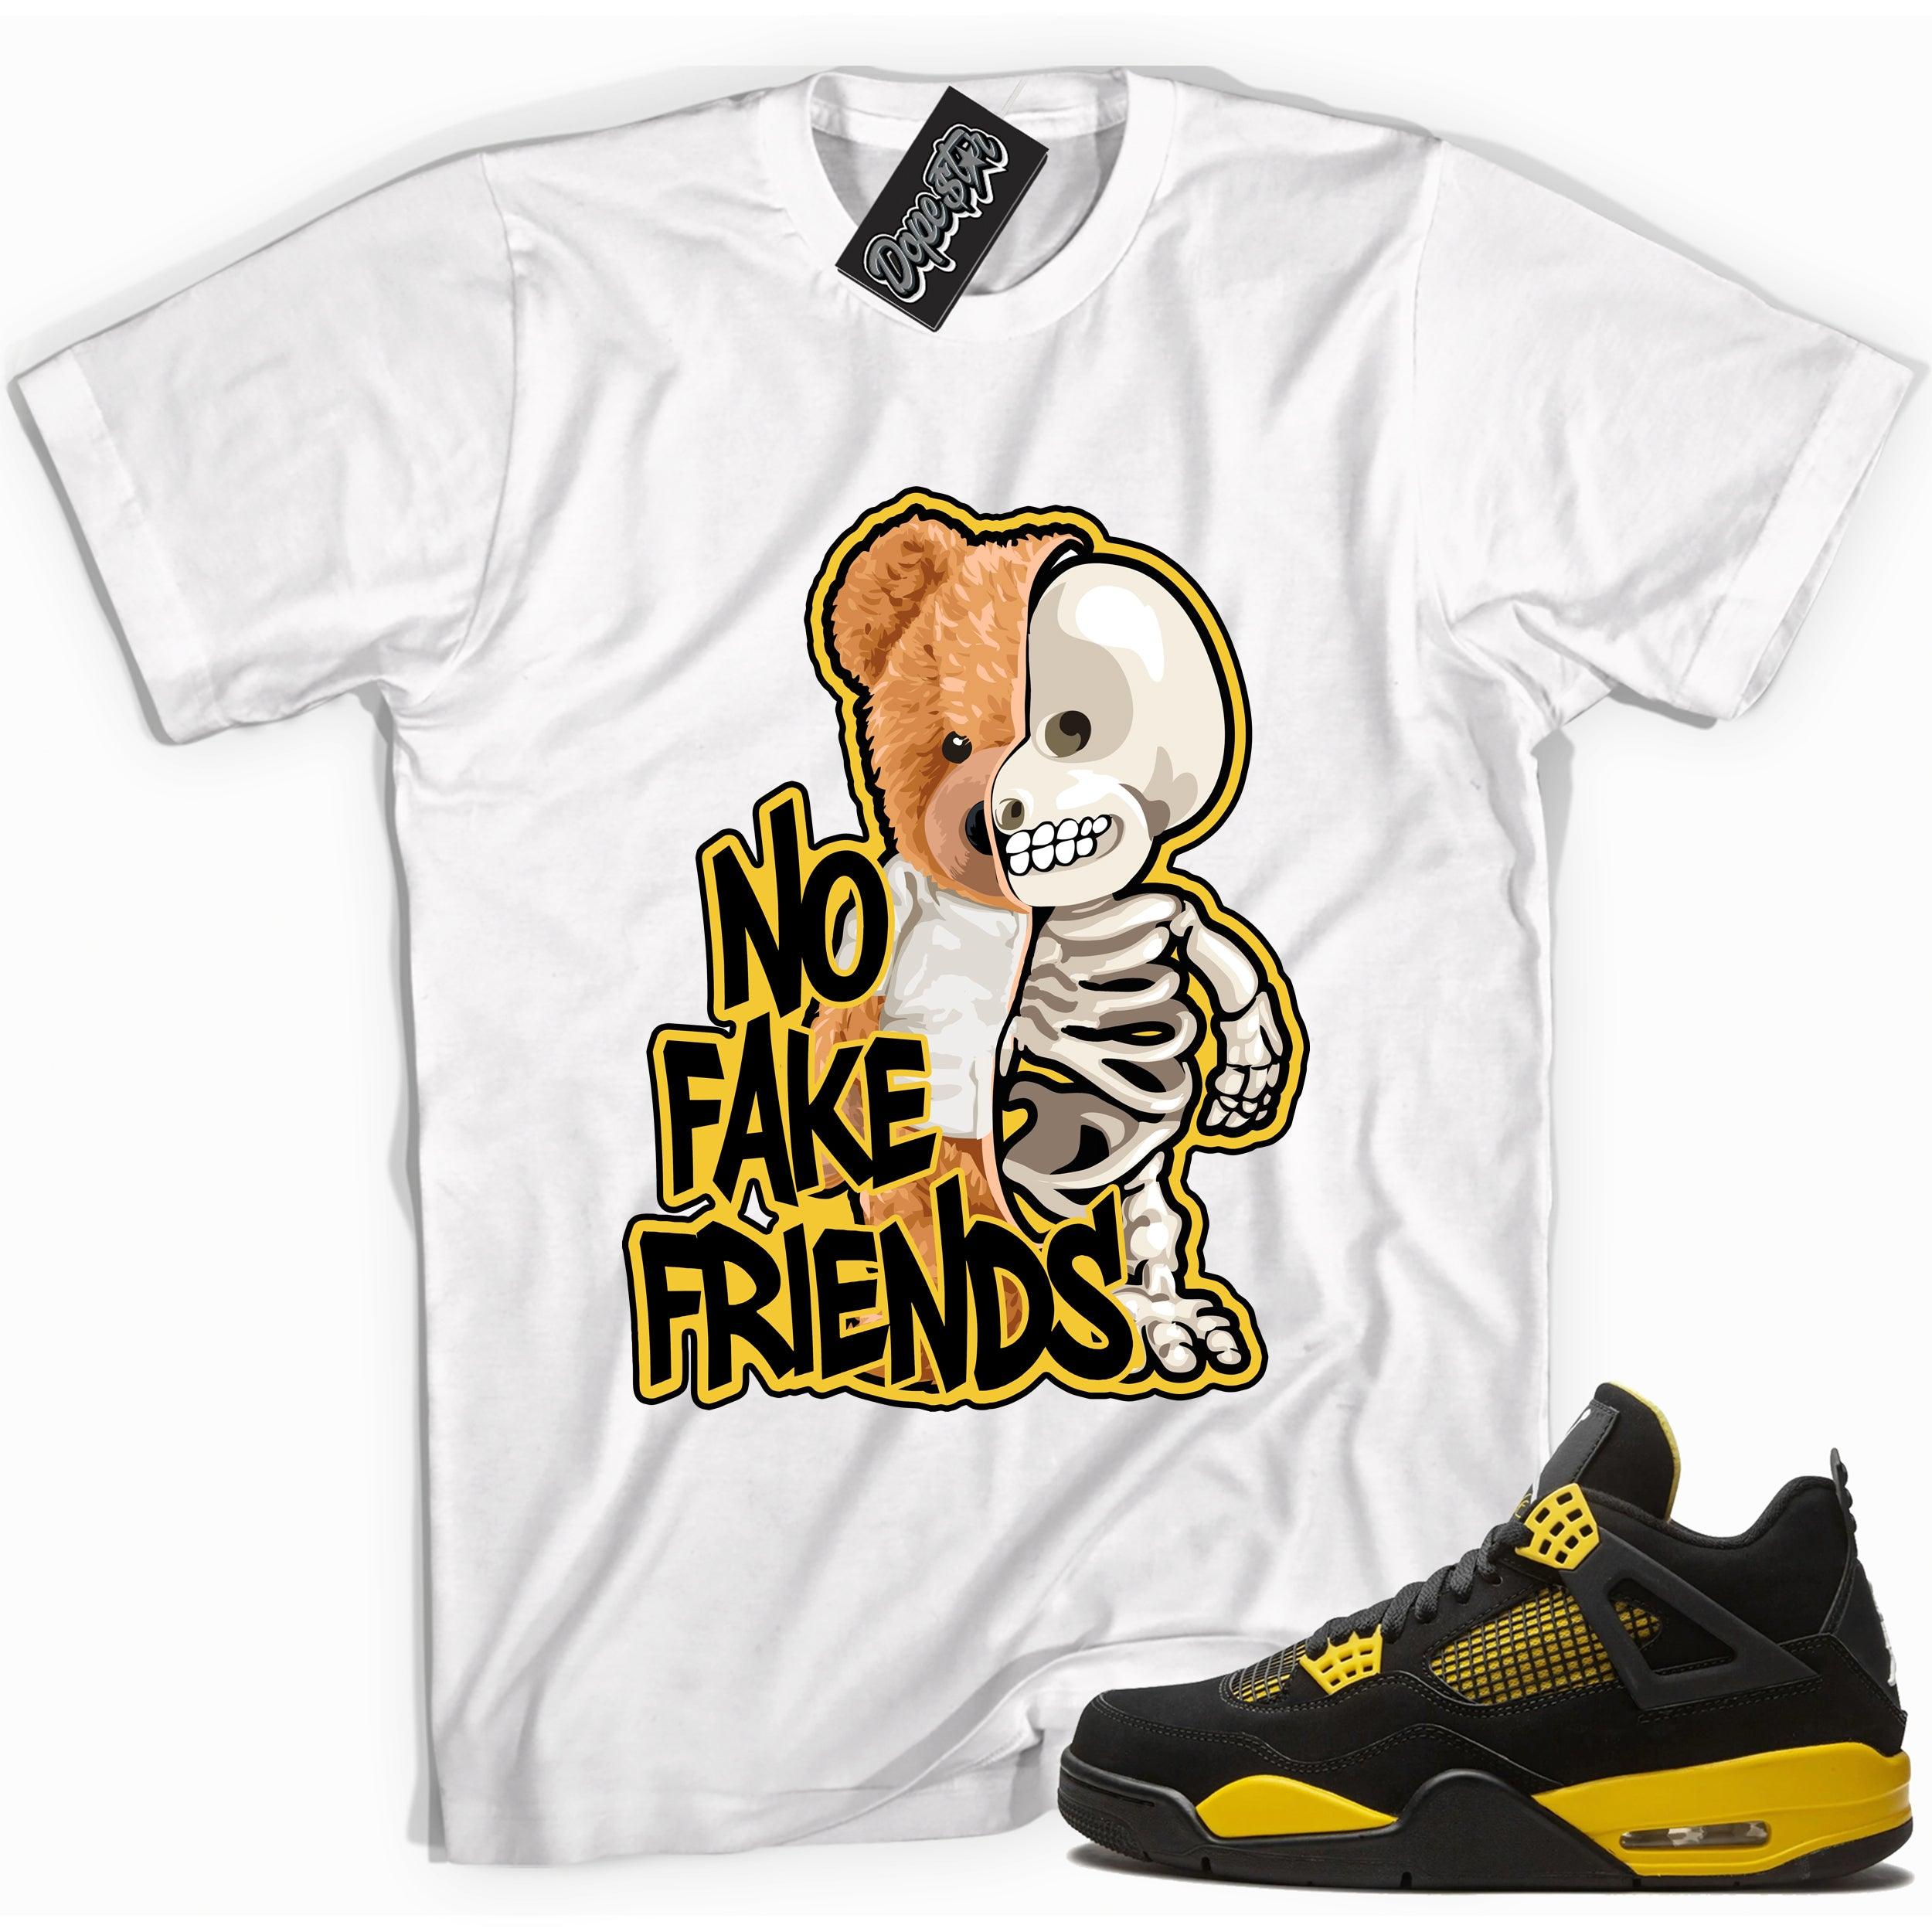 Cool white graphic tee with 'no fake friends' print, that perfectly matches Air Jordan 4 Thunder sneakers